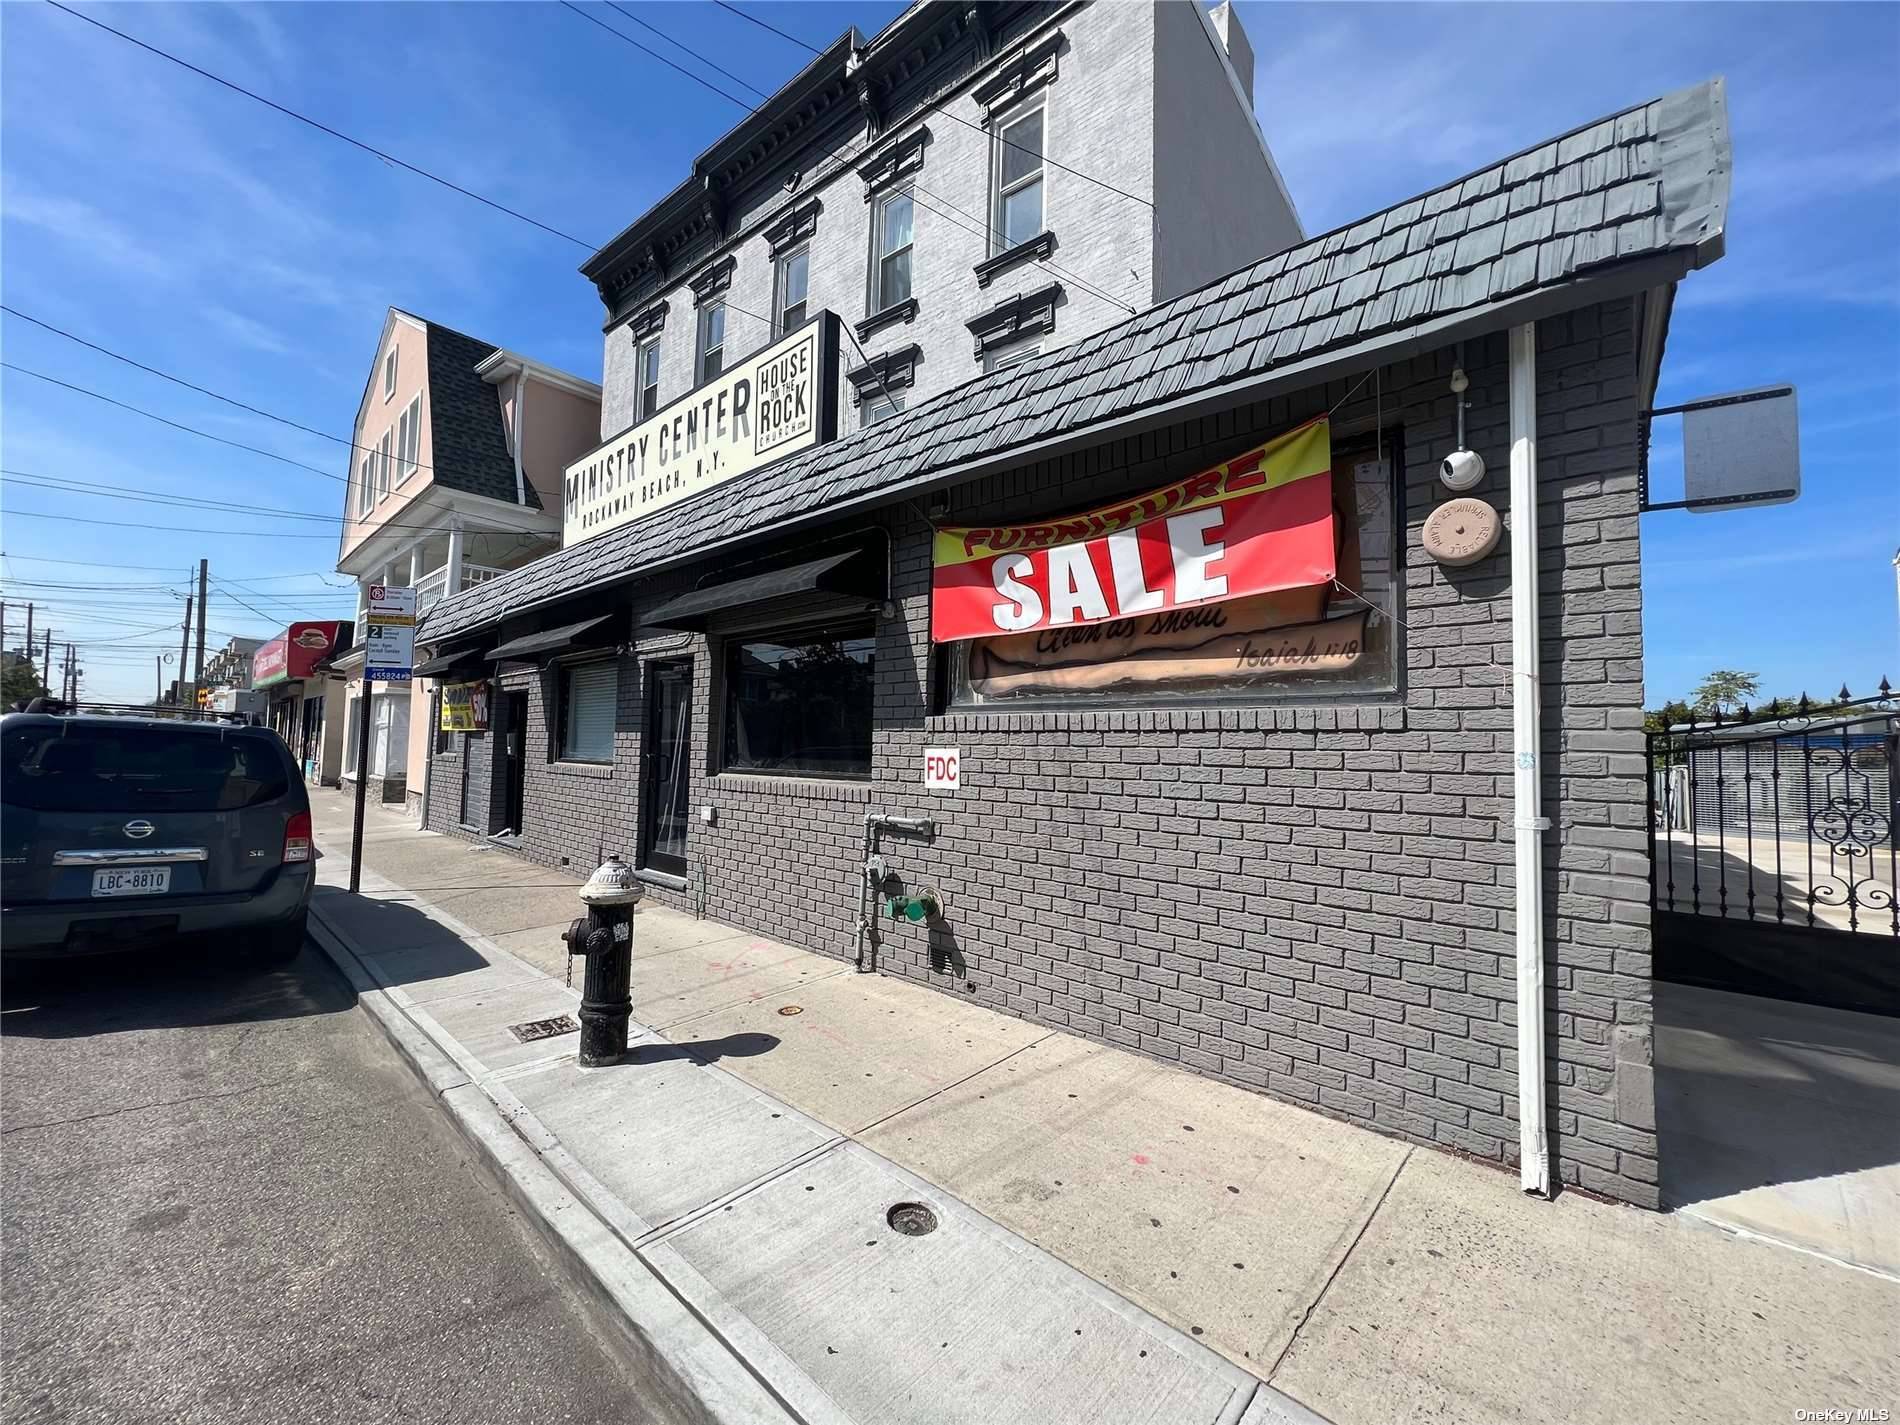 Storefront For Rent in the heart of Rockaway Park !